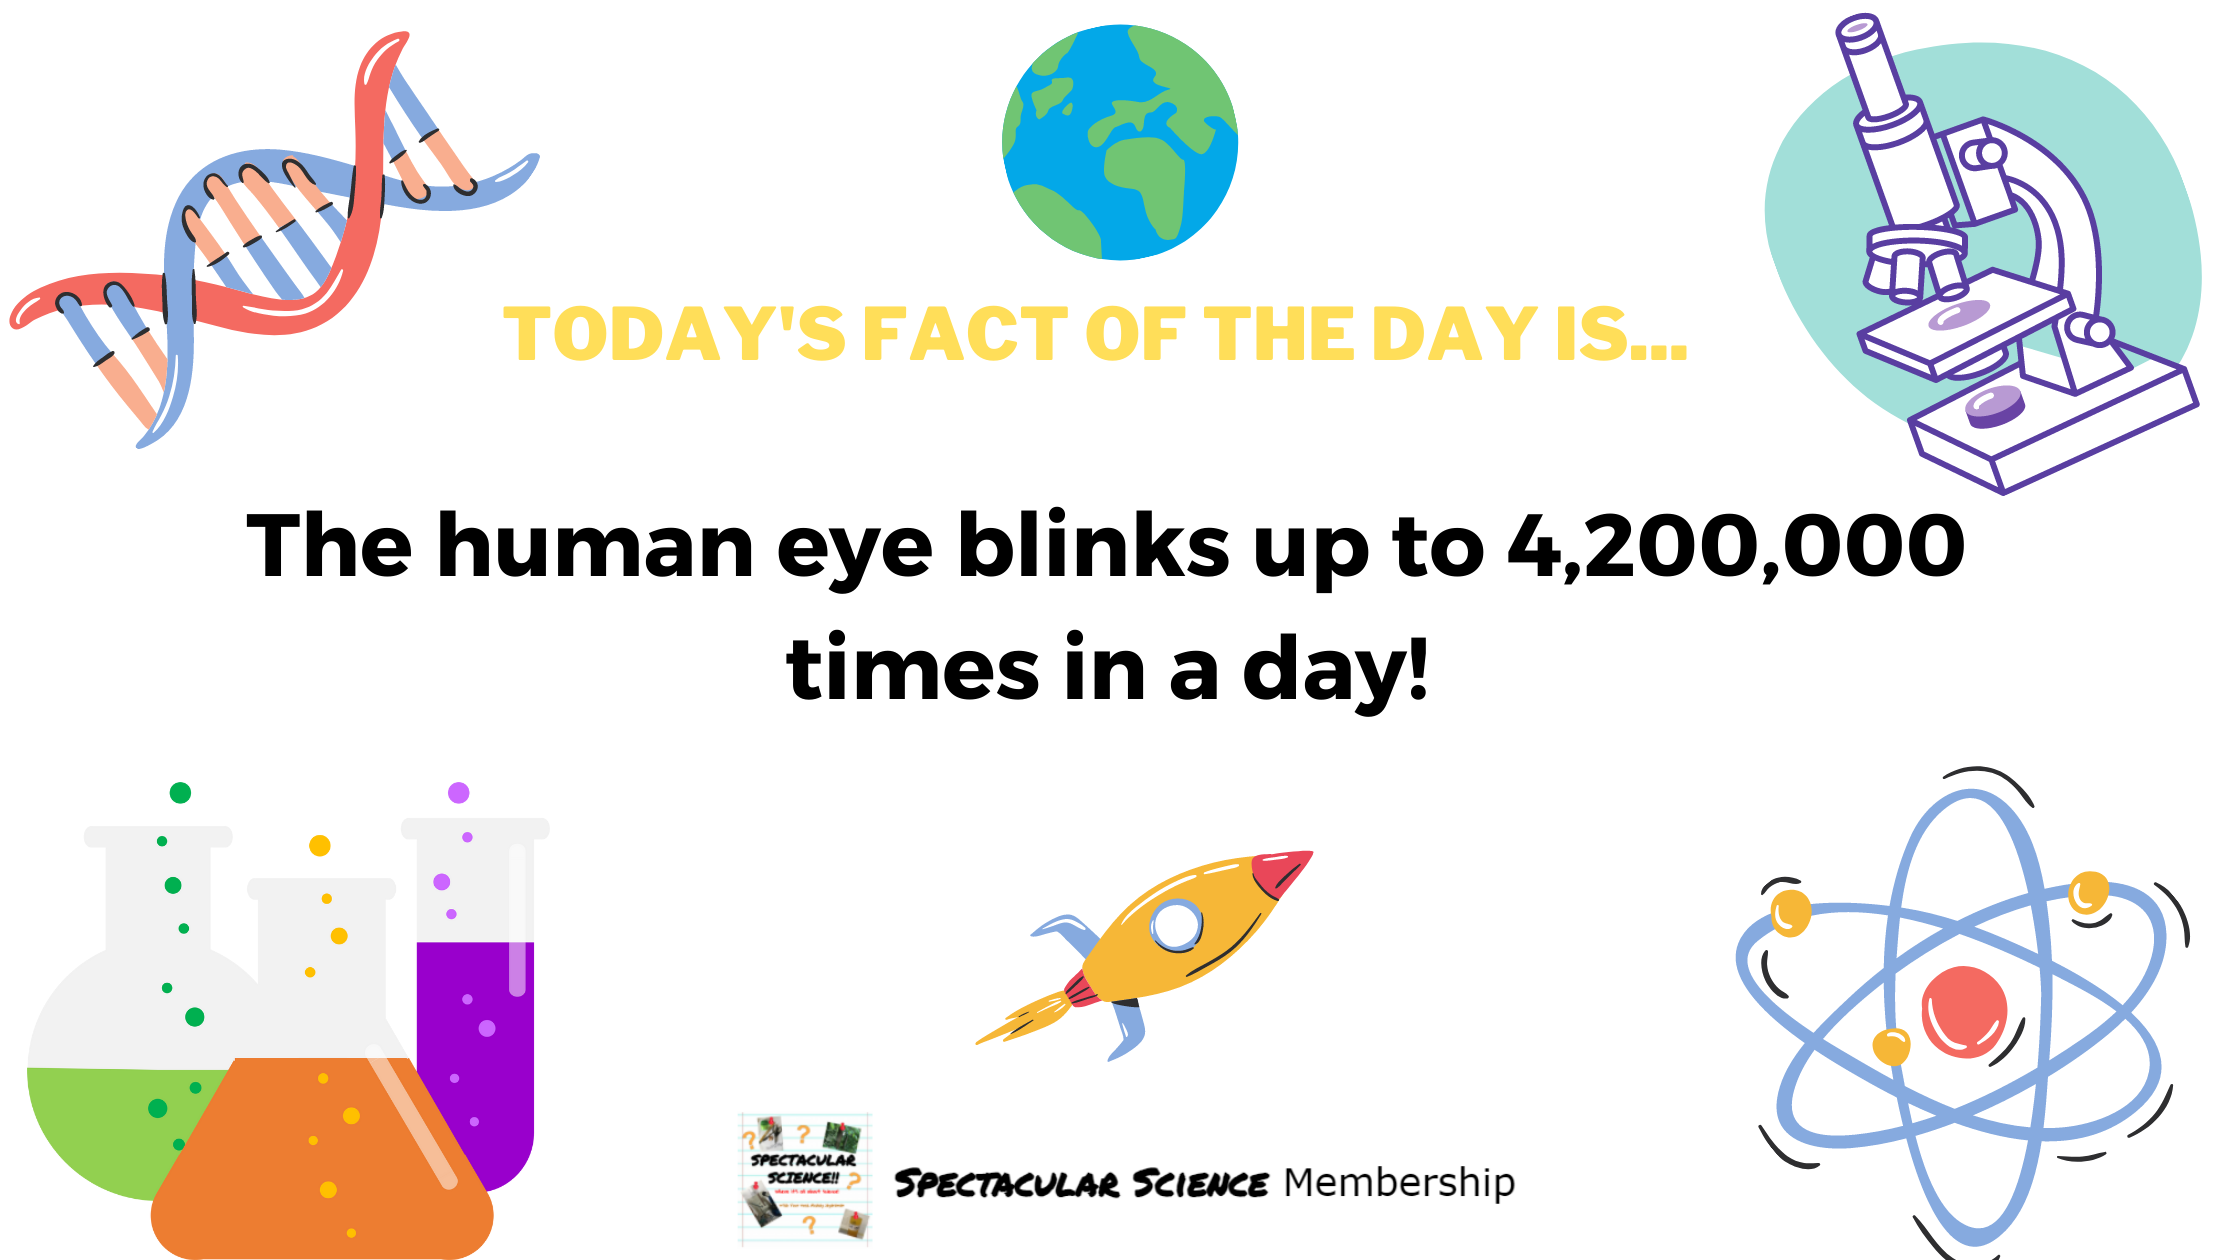 Fact of the Day Image Nov. 17th